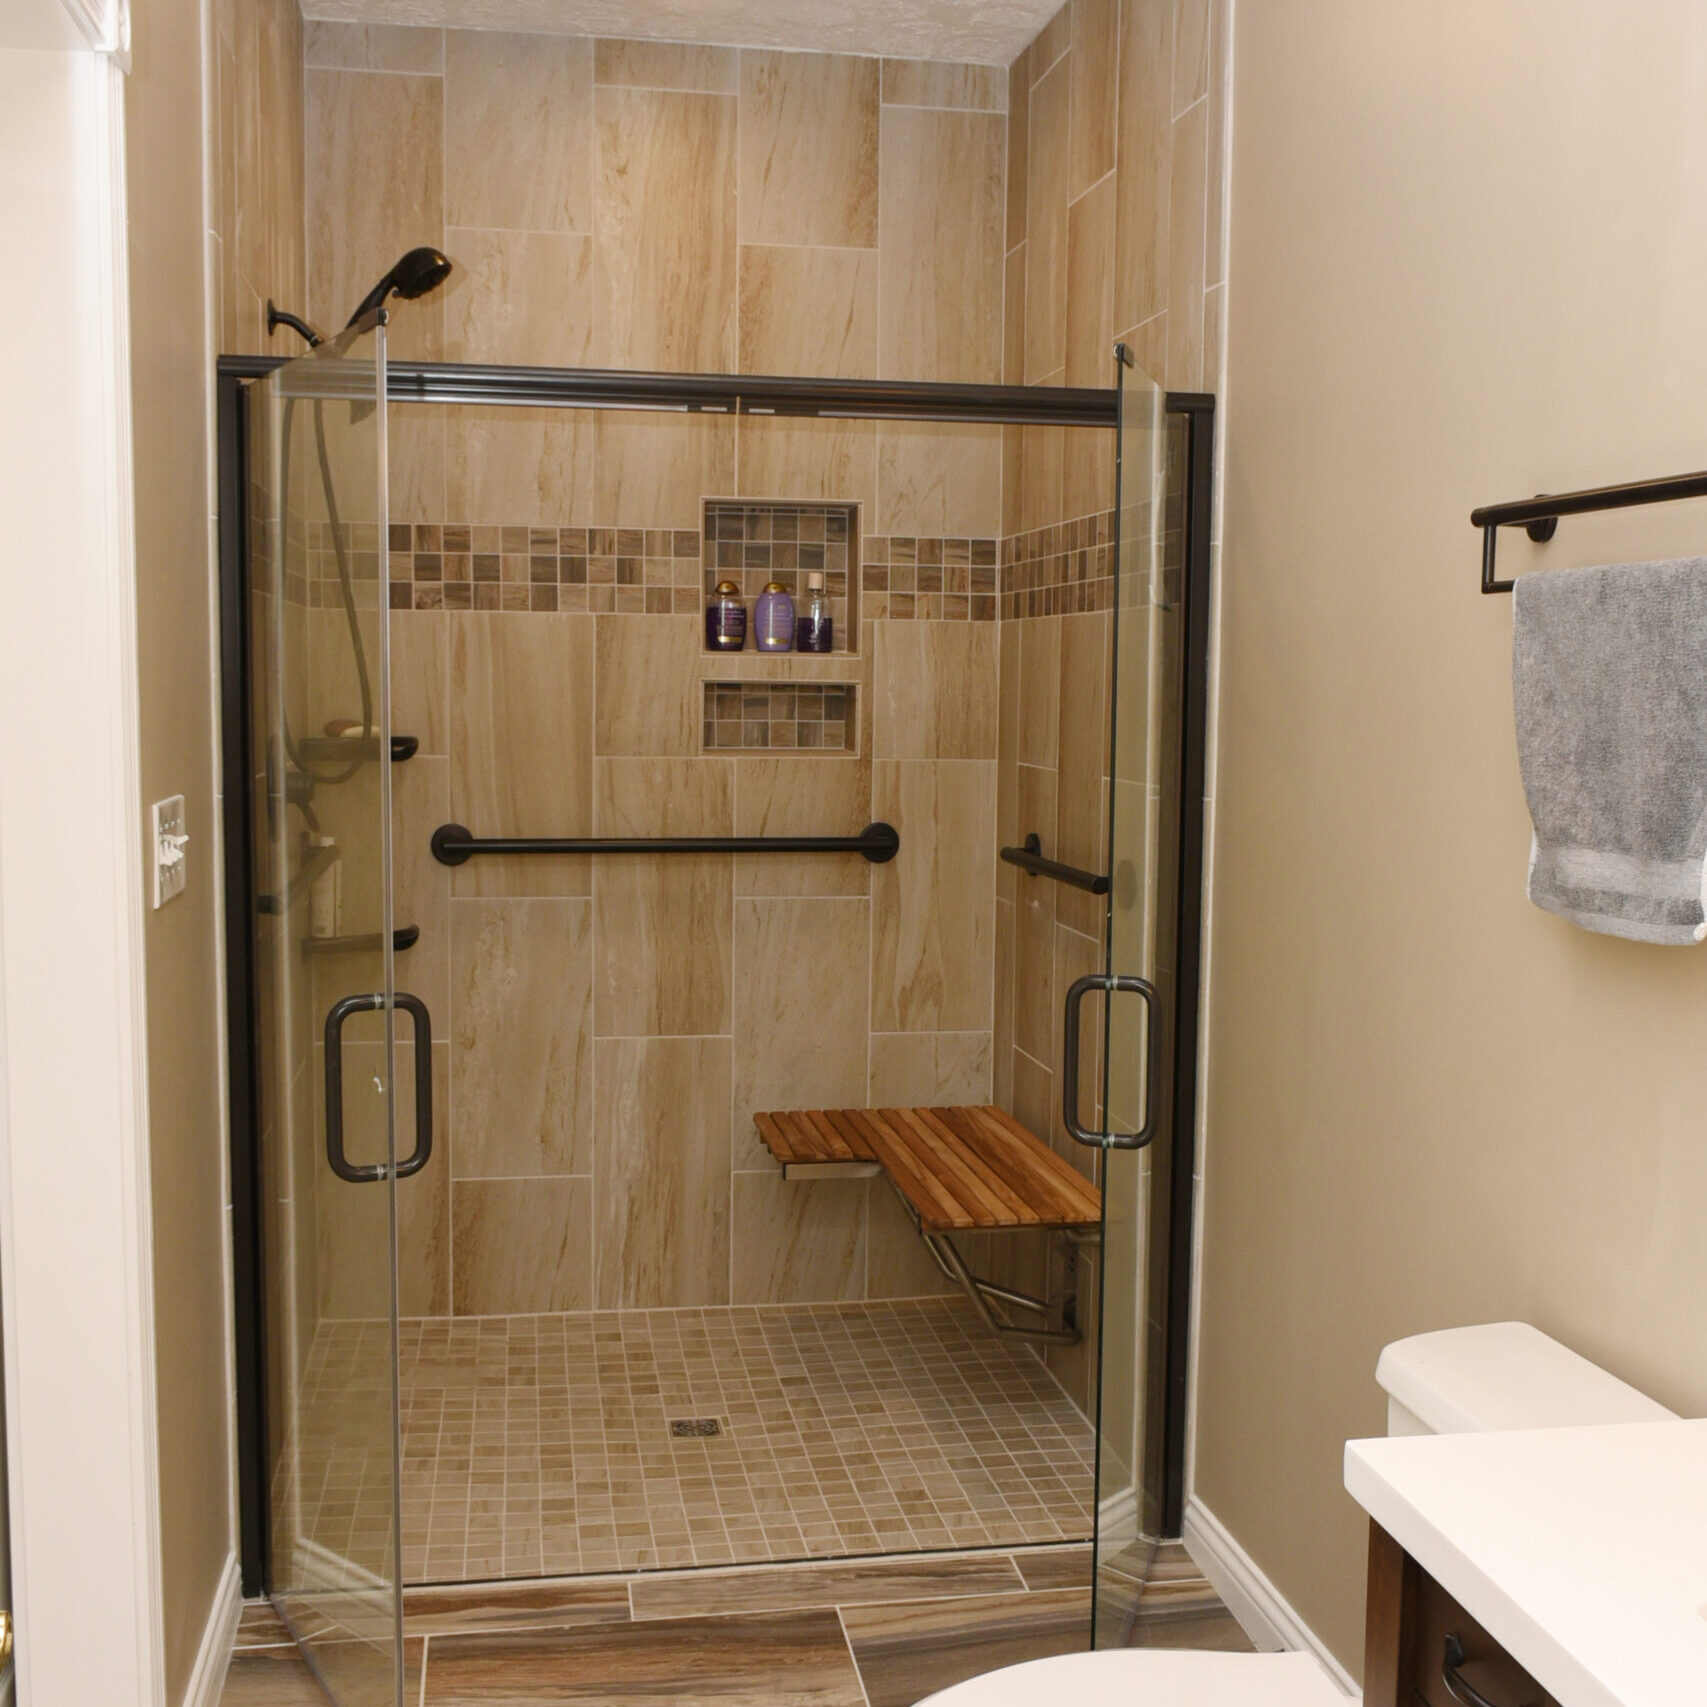 coors interior remodeling can help you design an accessible shower